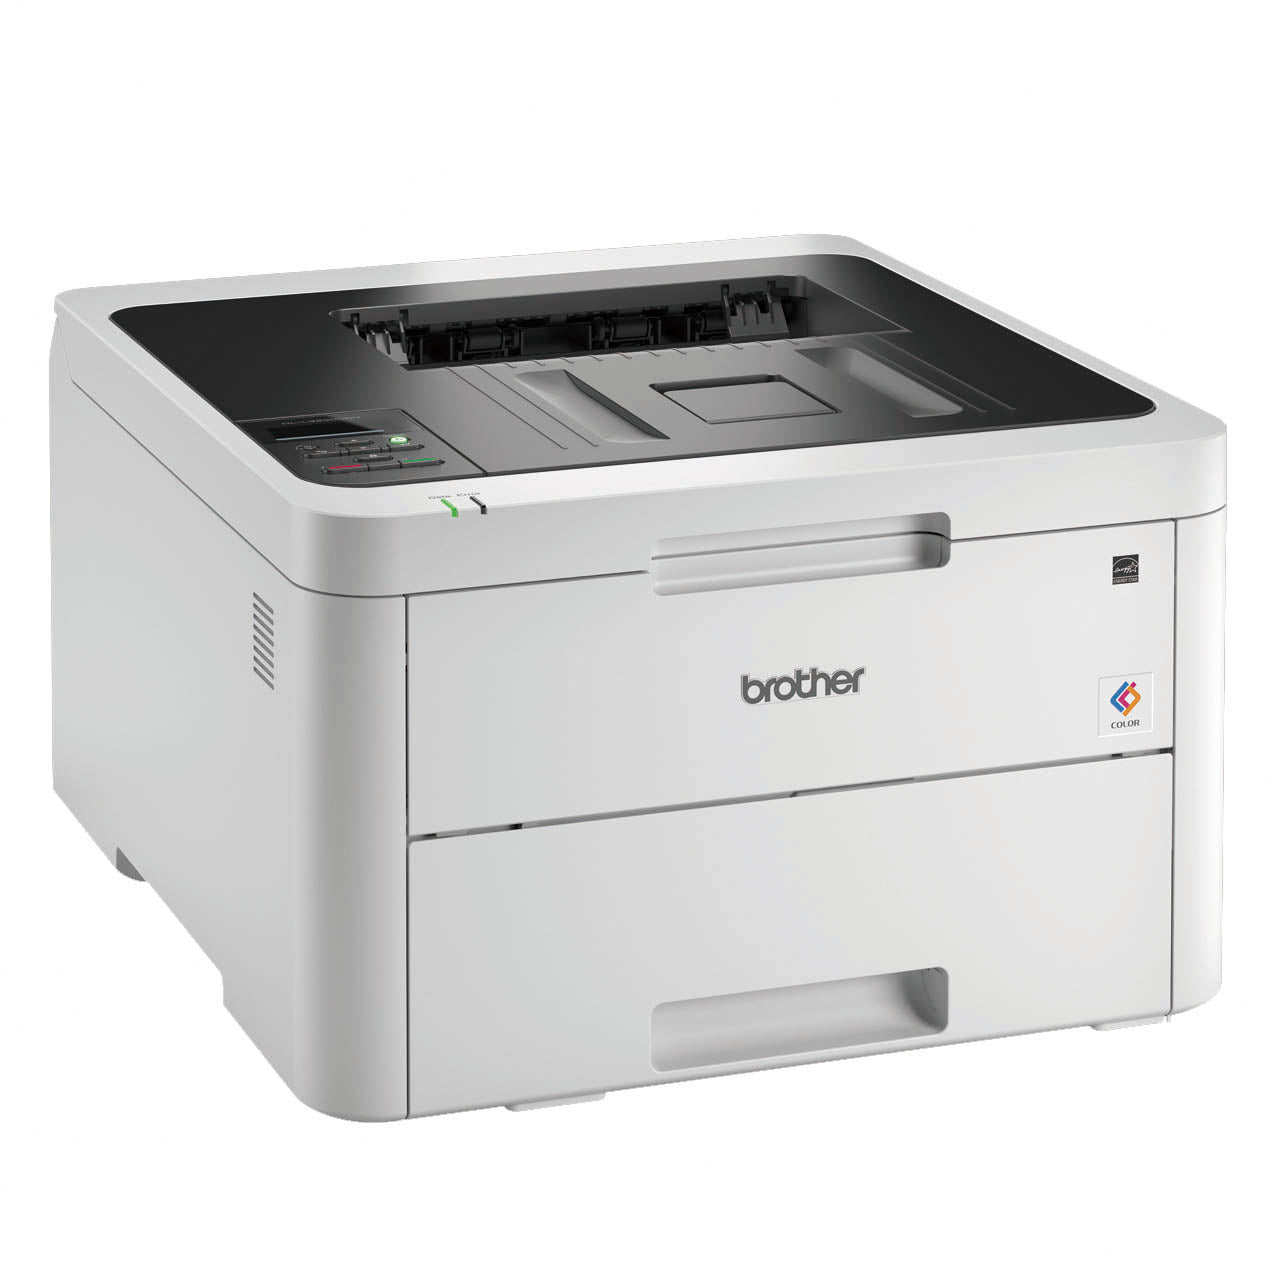 Brother Colour LED Printer with Network Connectivity Laser Printer